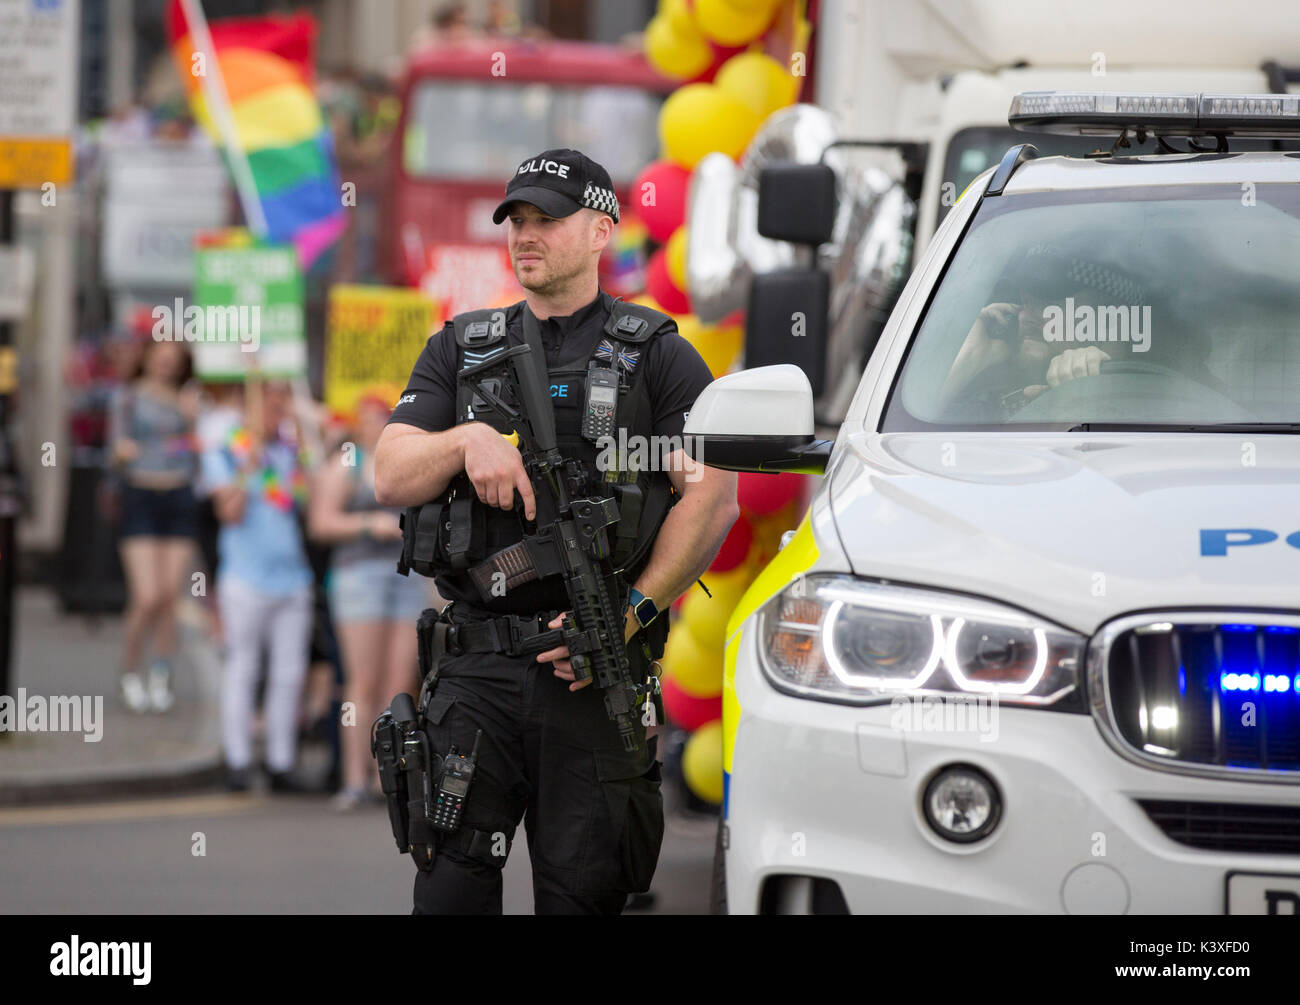 An armed police officer in Birmingham city centre during Pride celebrations. Stock Photo